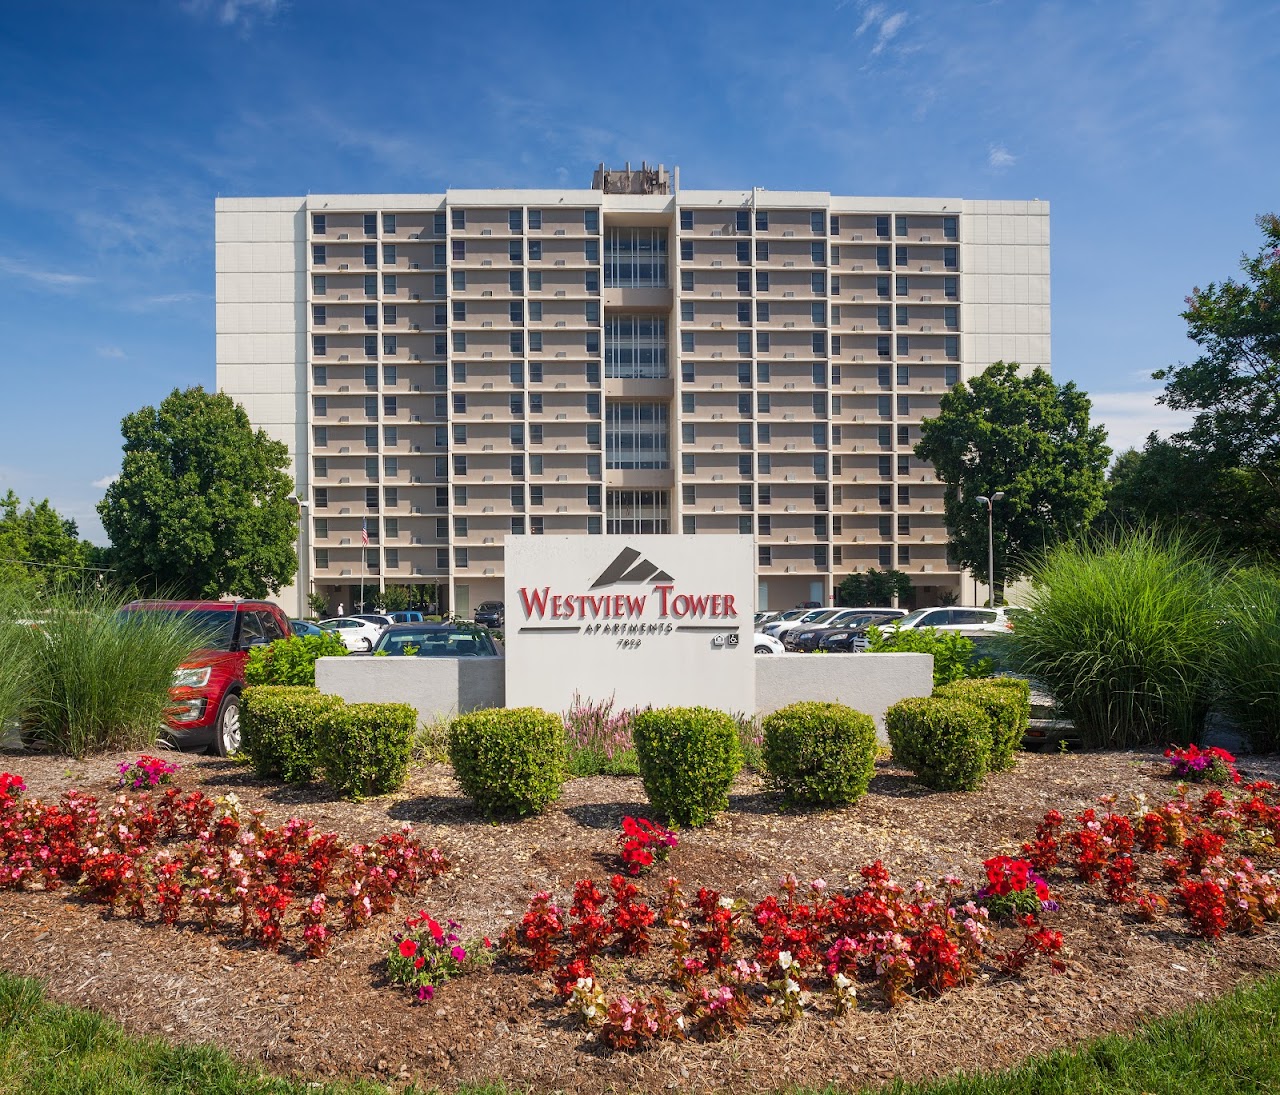 Photo of WESTVIEW TOWERS APTS. Affordable housing located at 7823 GLEASON DR KNOXVILLE, TN 37919